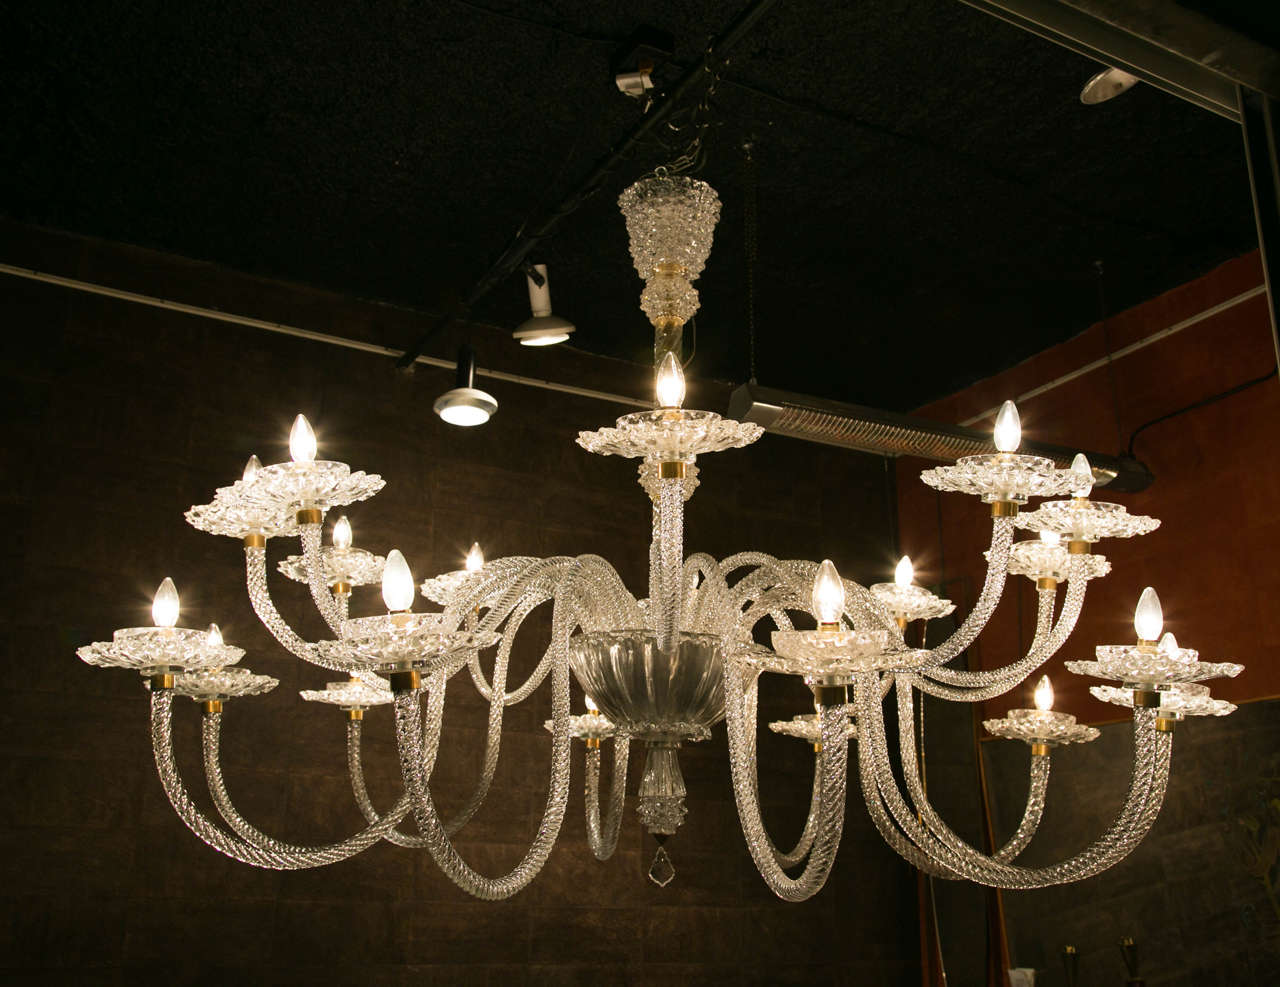 Monumental Murano blown glass chandelier.
20 lights.
The central support, bowls and bobeches are in faceted glass.
Two levels.
Perfect condition.
Rewired.

Italy, 1940.